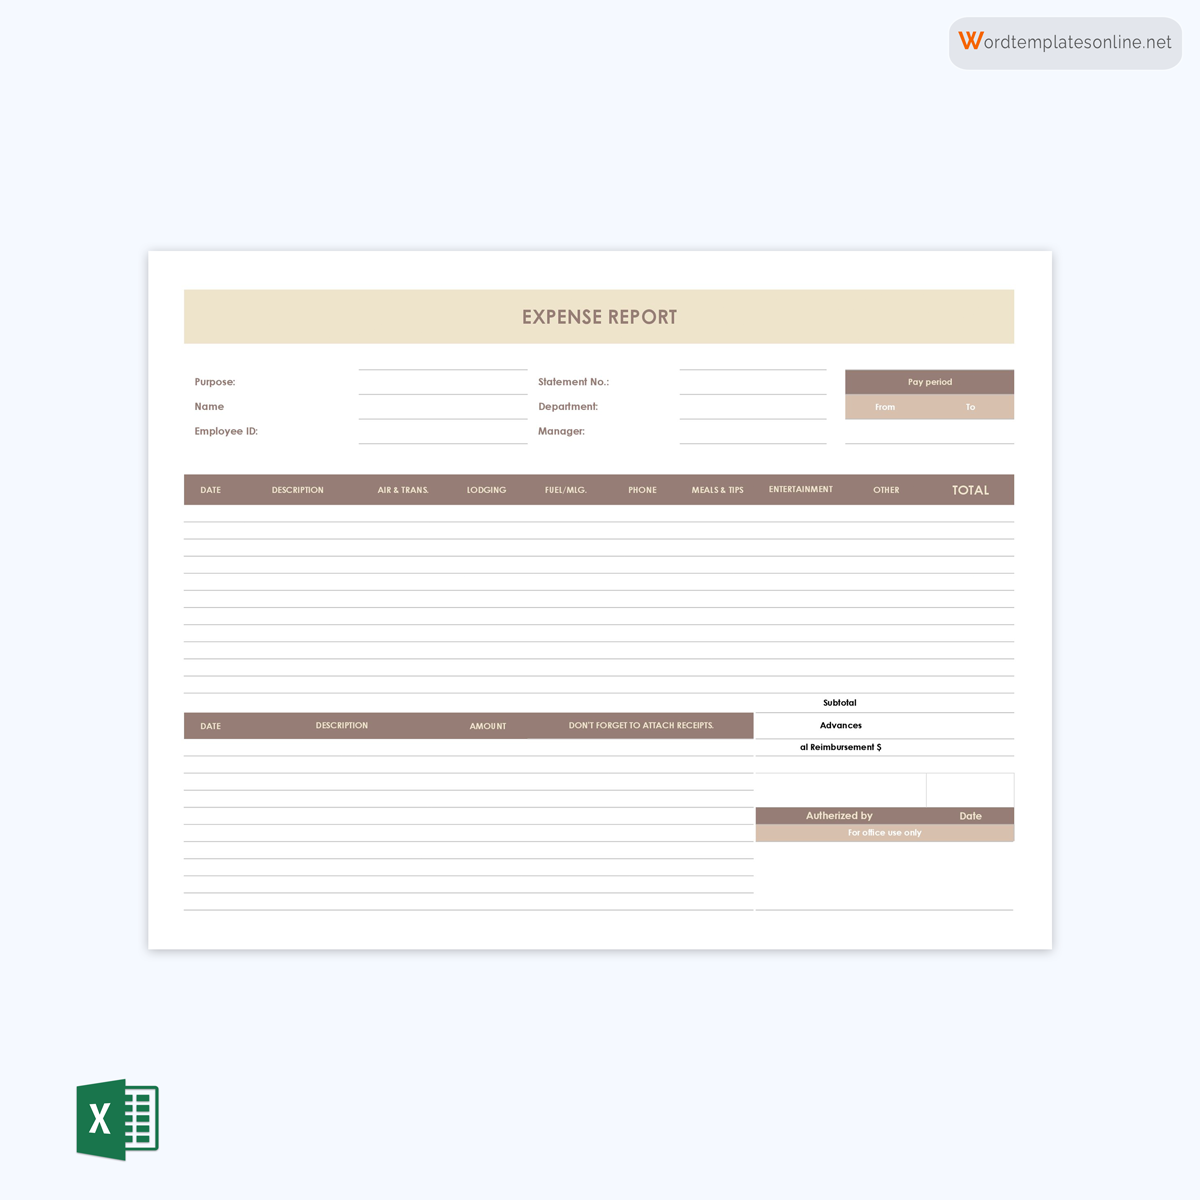 Free Editable Expense Report Template 01 as Excel Sheet